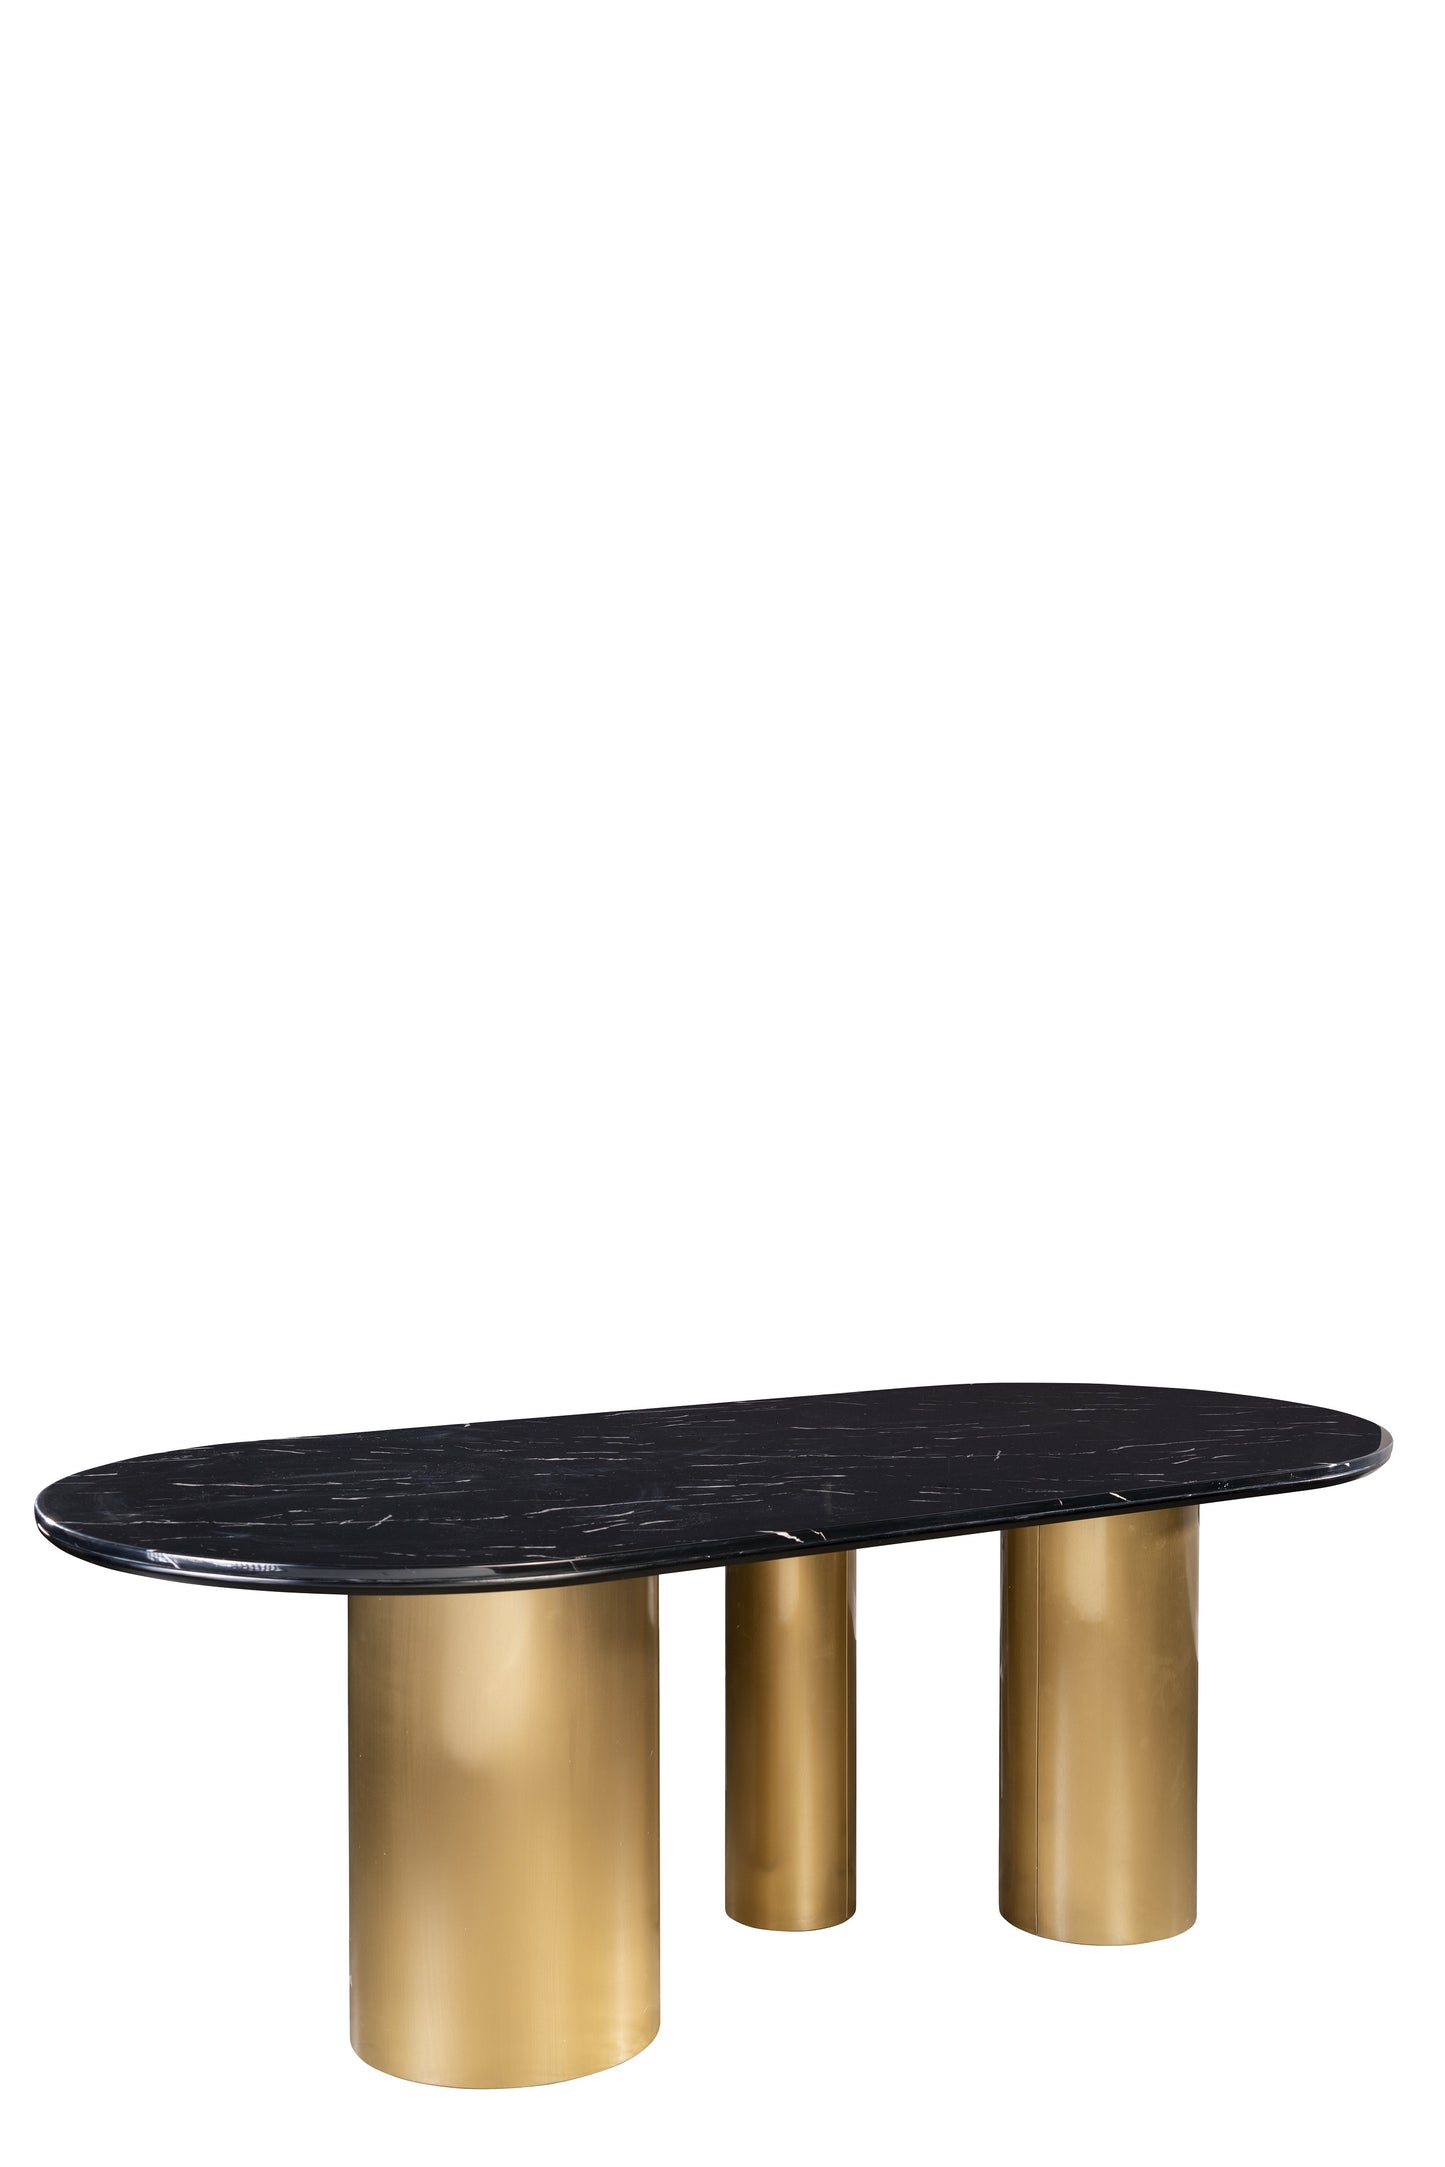 Balmain Marble Top Oval Dining Table for 6 with Black Chairs